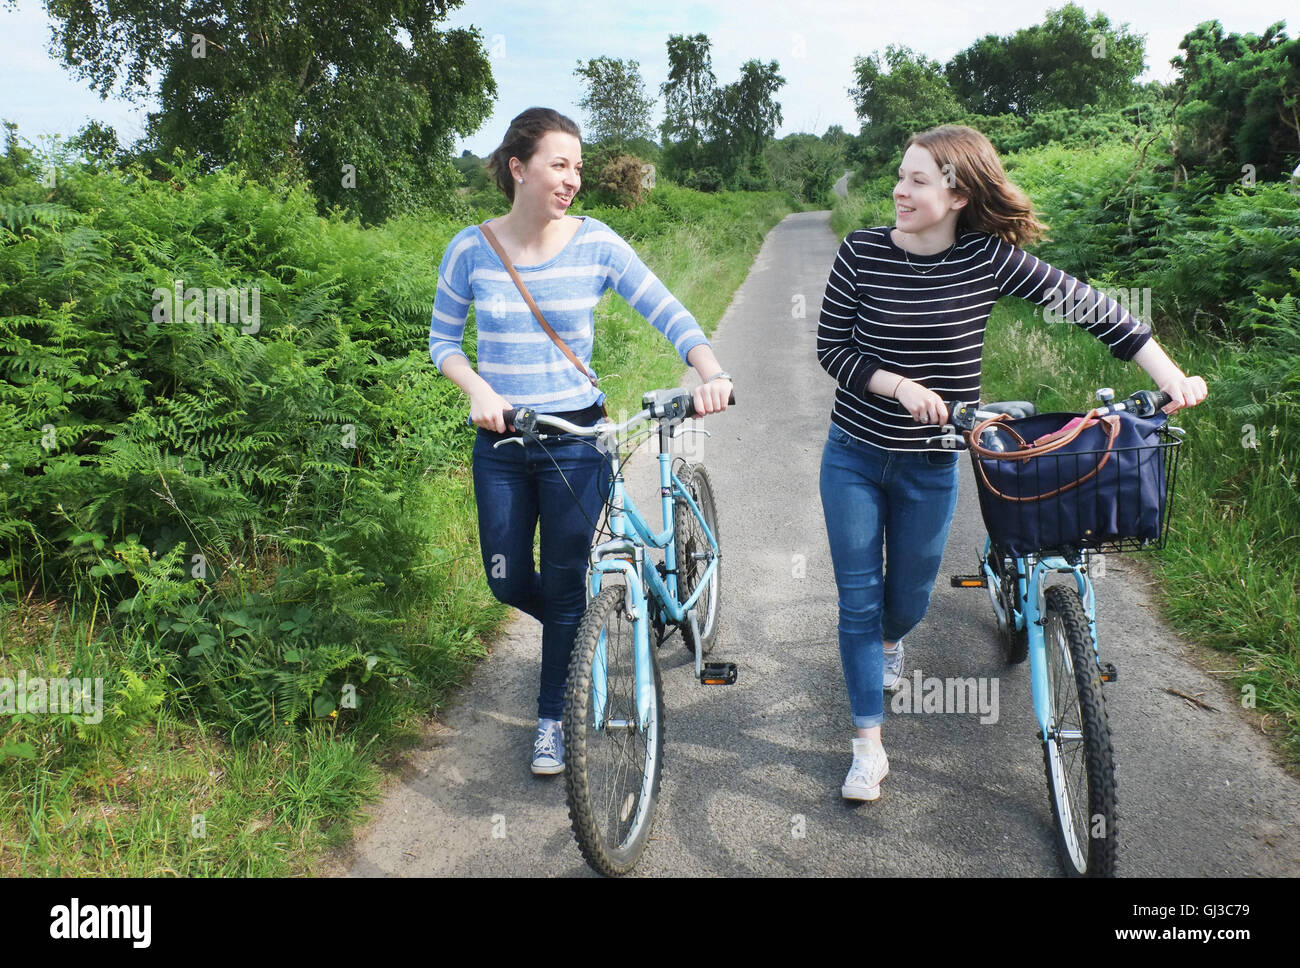 Two young adults pushing bicycles and chatting along country lane Stock Photo